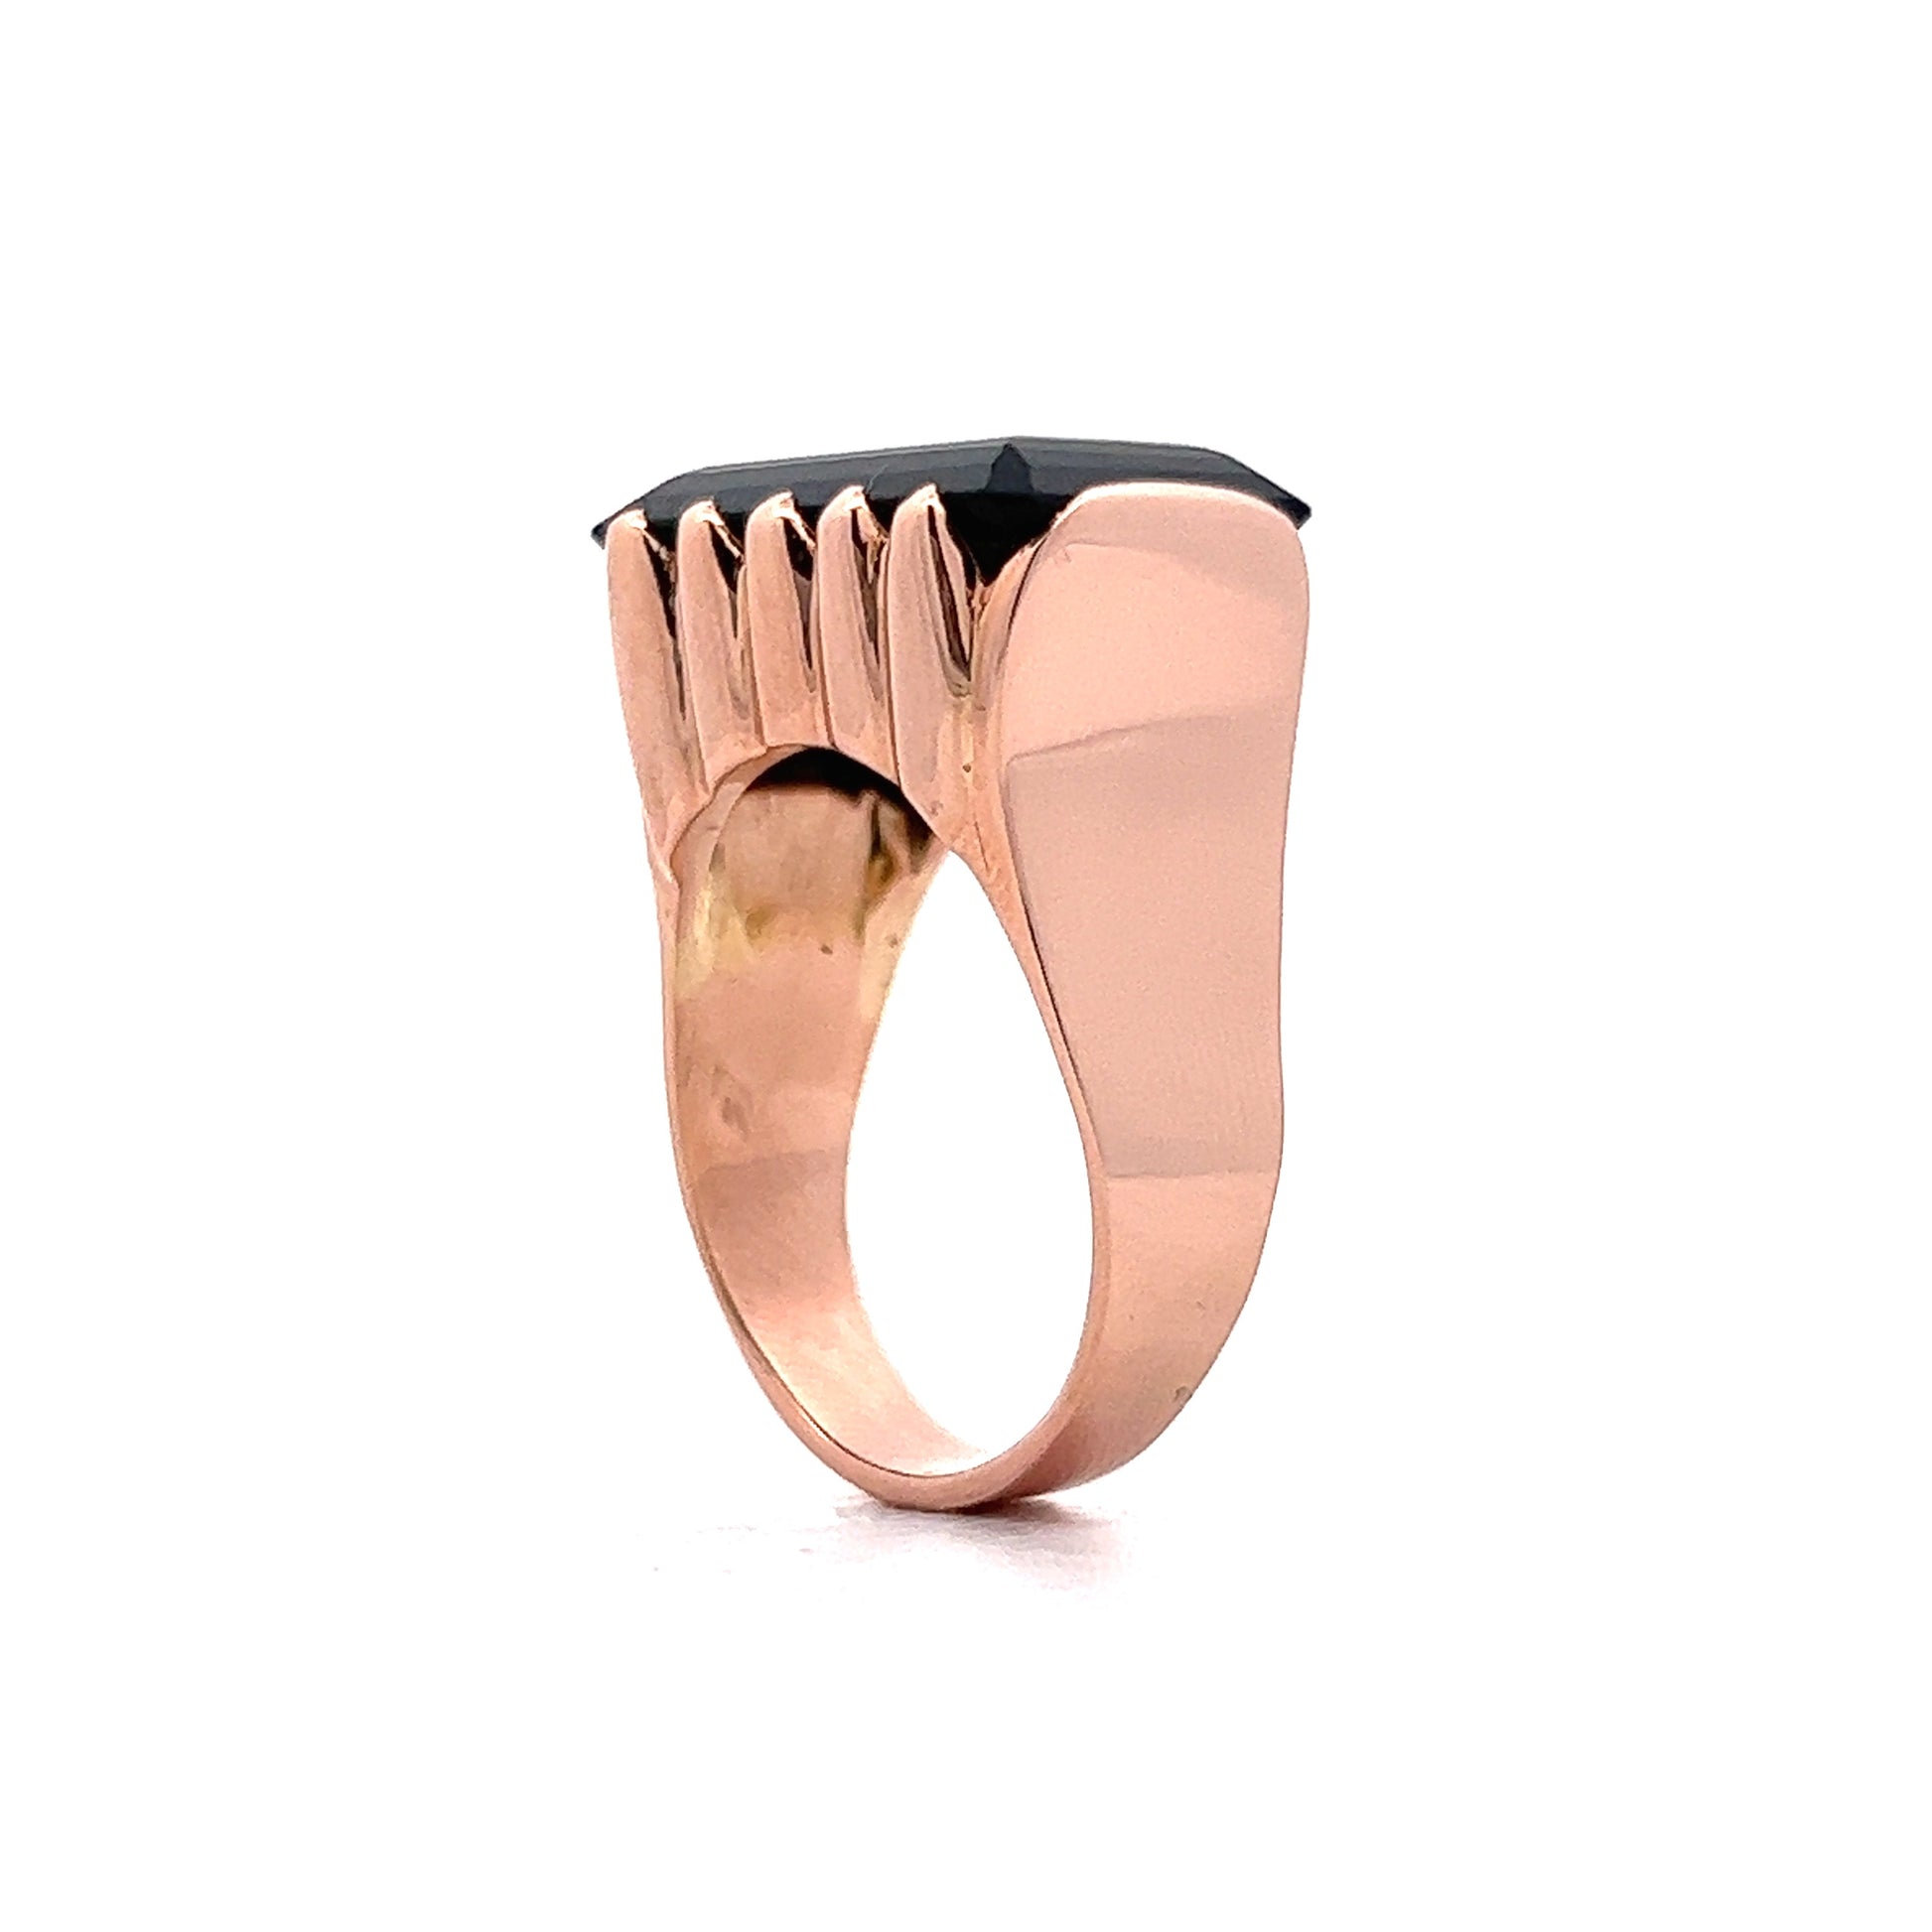 10.13 Emerald Cut Tourmaline Cocktail Ring in Rose Gold